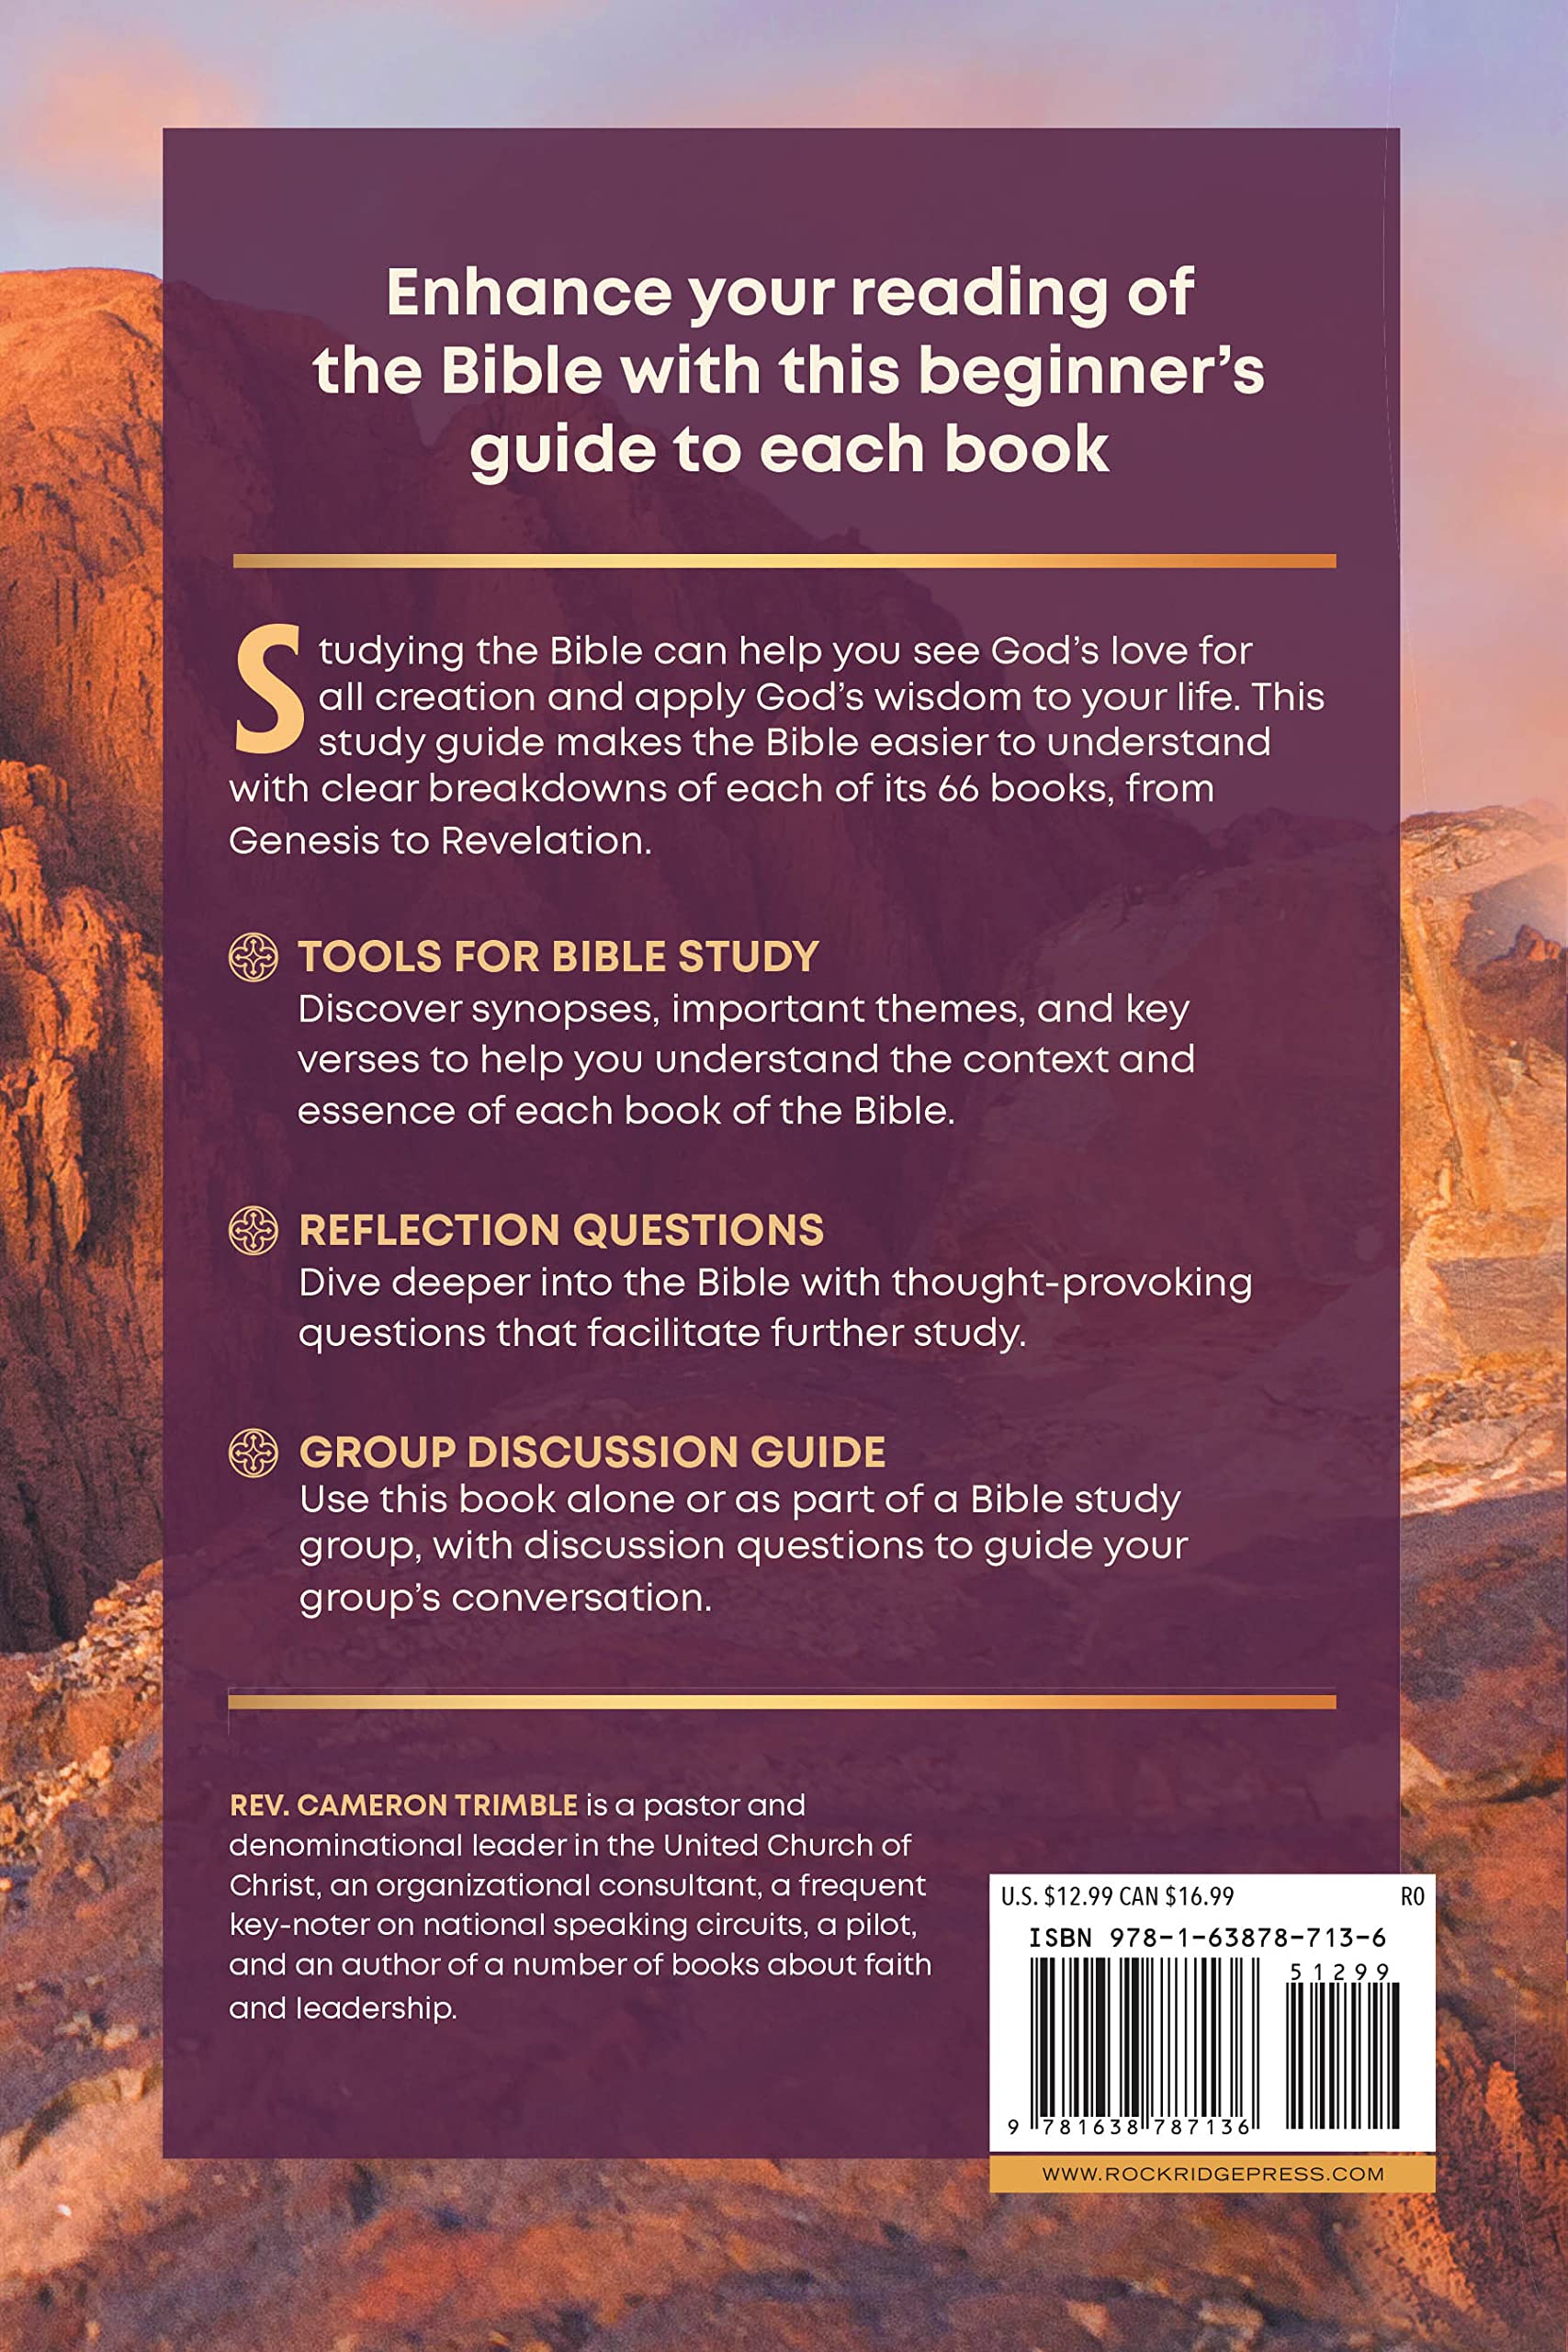 Beginner's Bible Study Guide: An Introduction to All 66 Books of the Bible